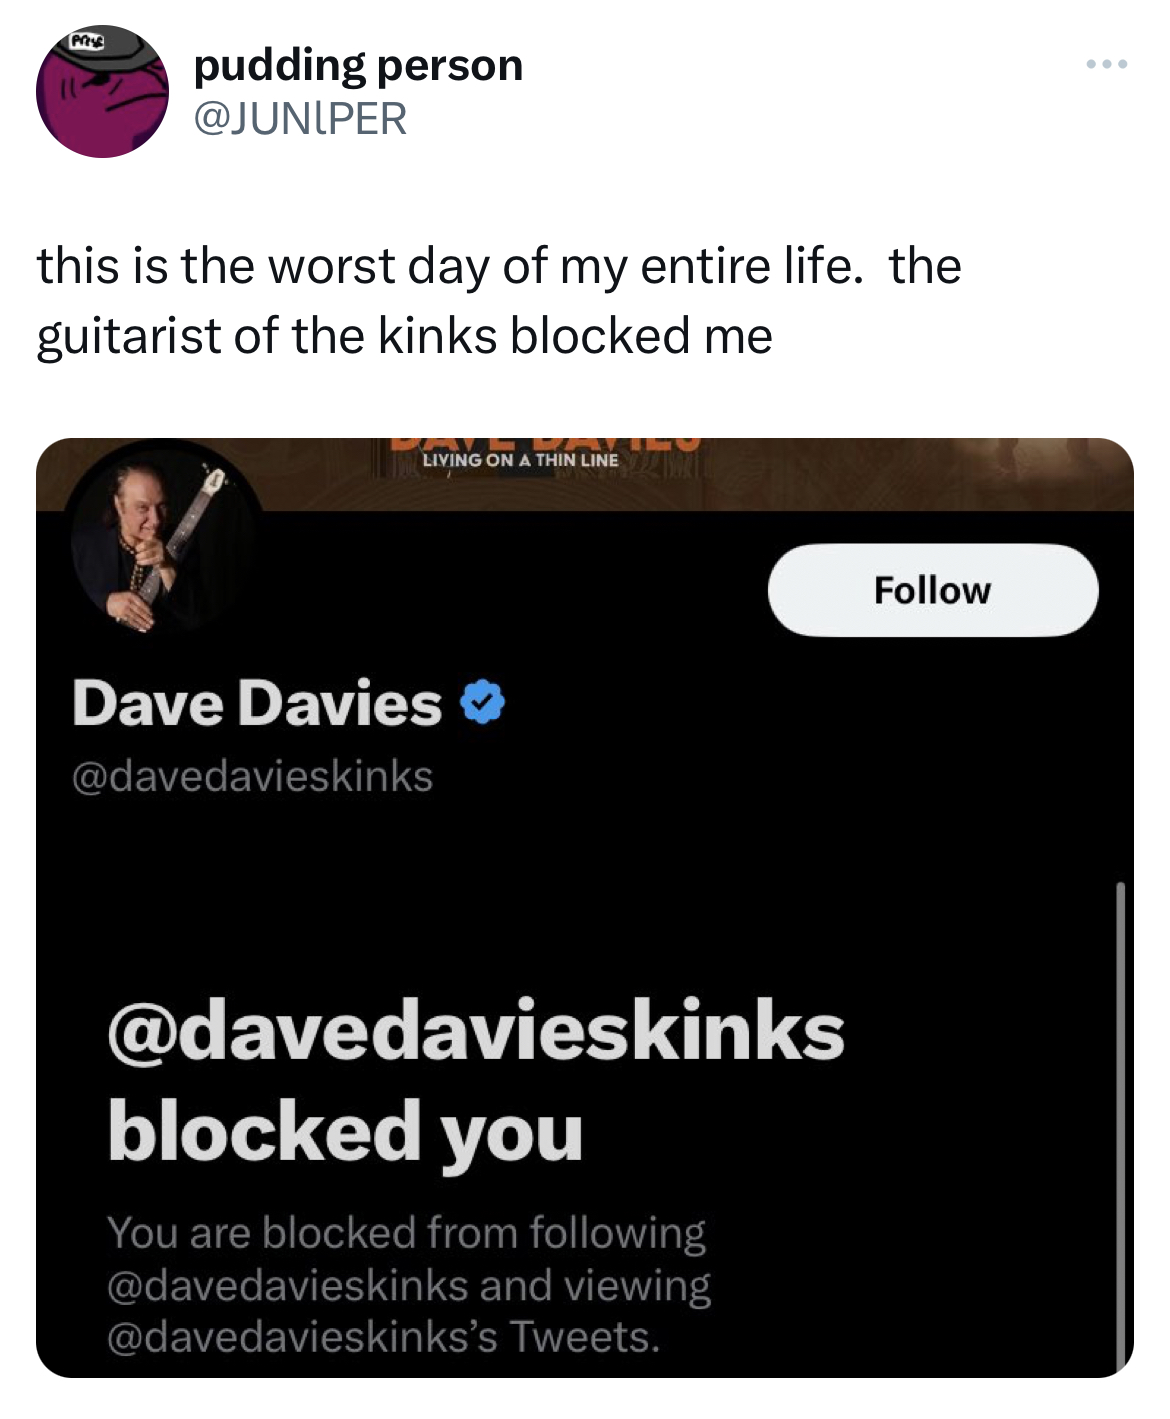 Tweets dunking on celebs - multimedia - pudding person this is the worst day of my entire life. the guitarist of the kinks blocked me Living On A Thin Line Dave Davies blocked you You are blocked from ing and viewing 's Tweets.